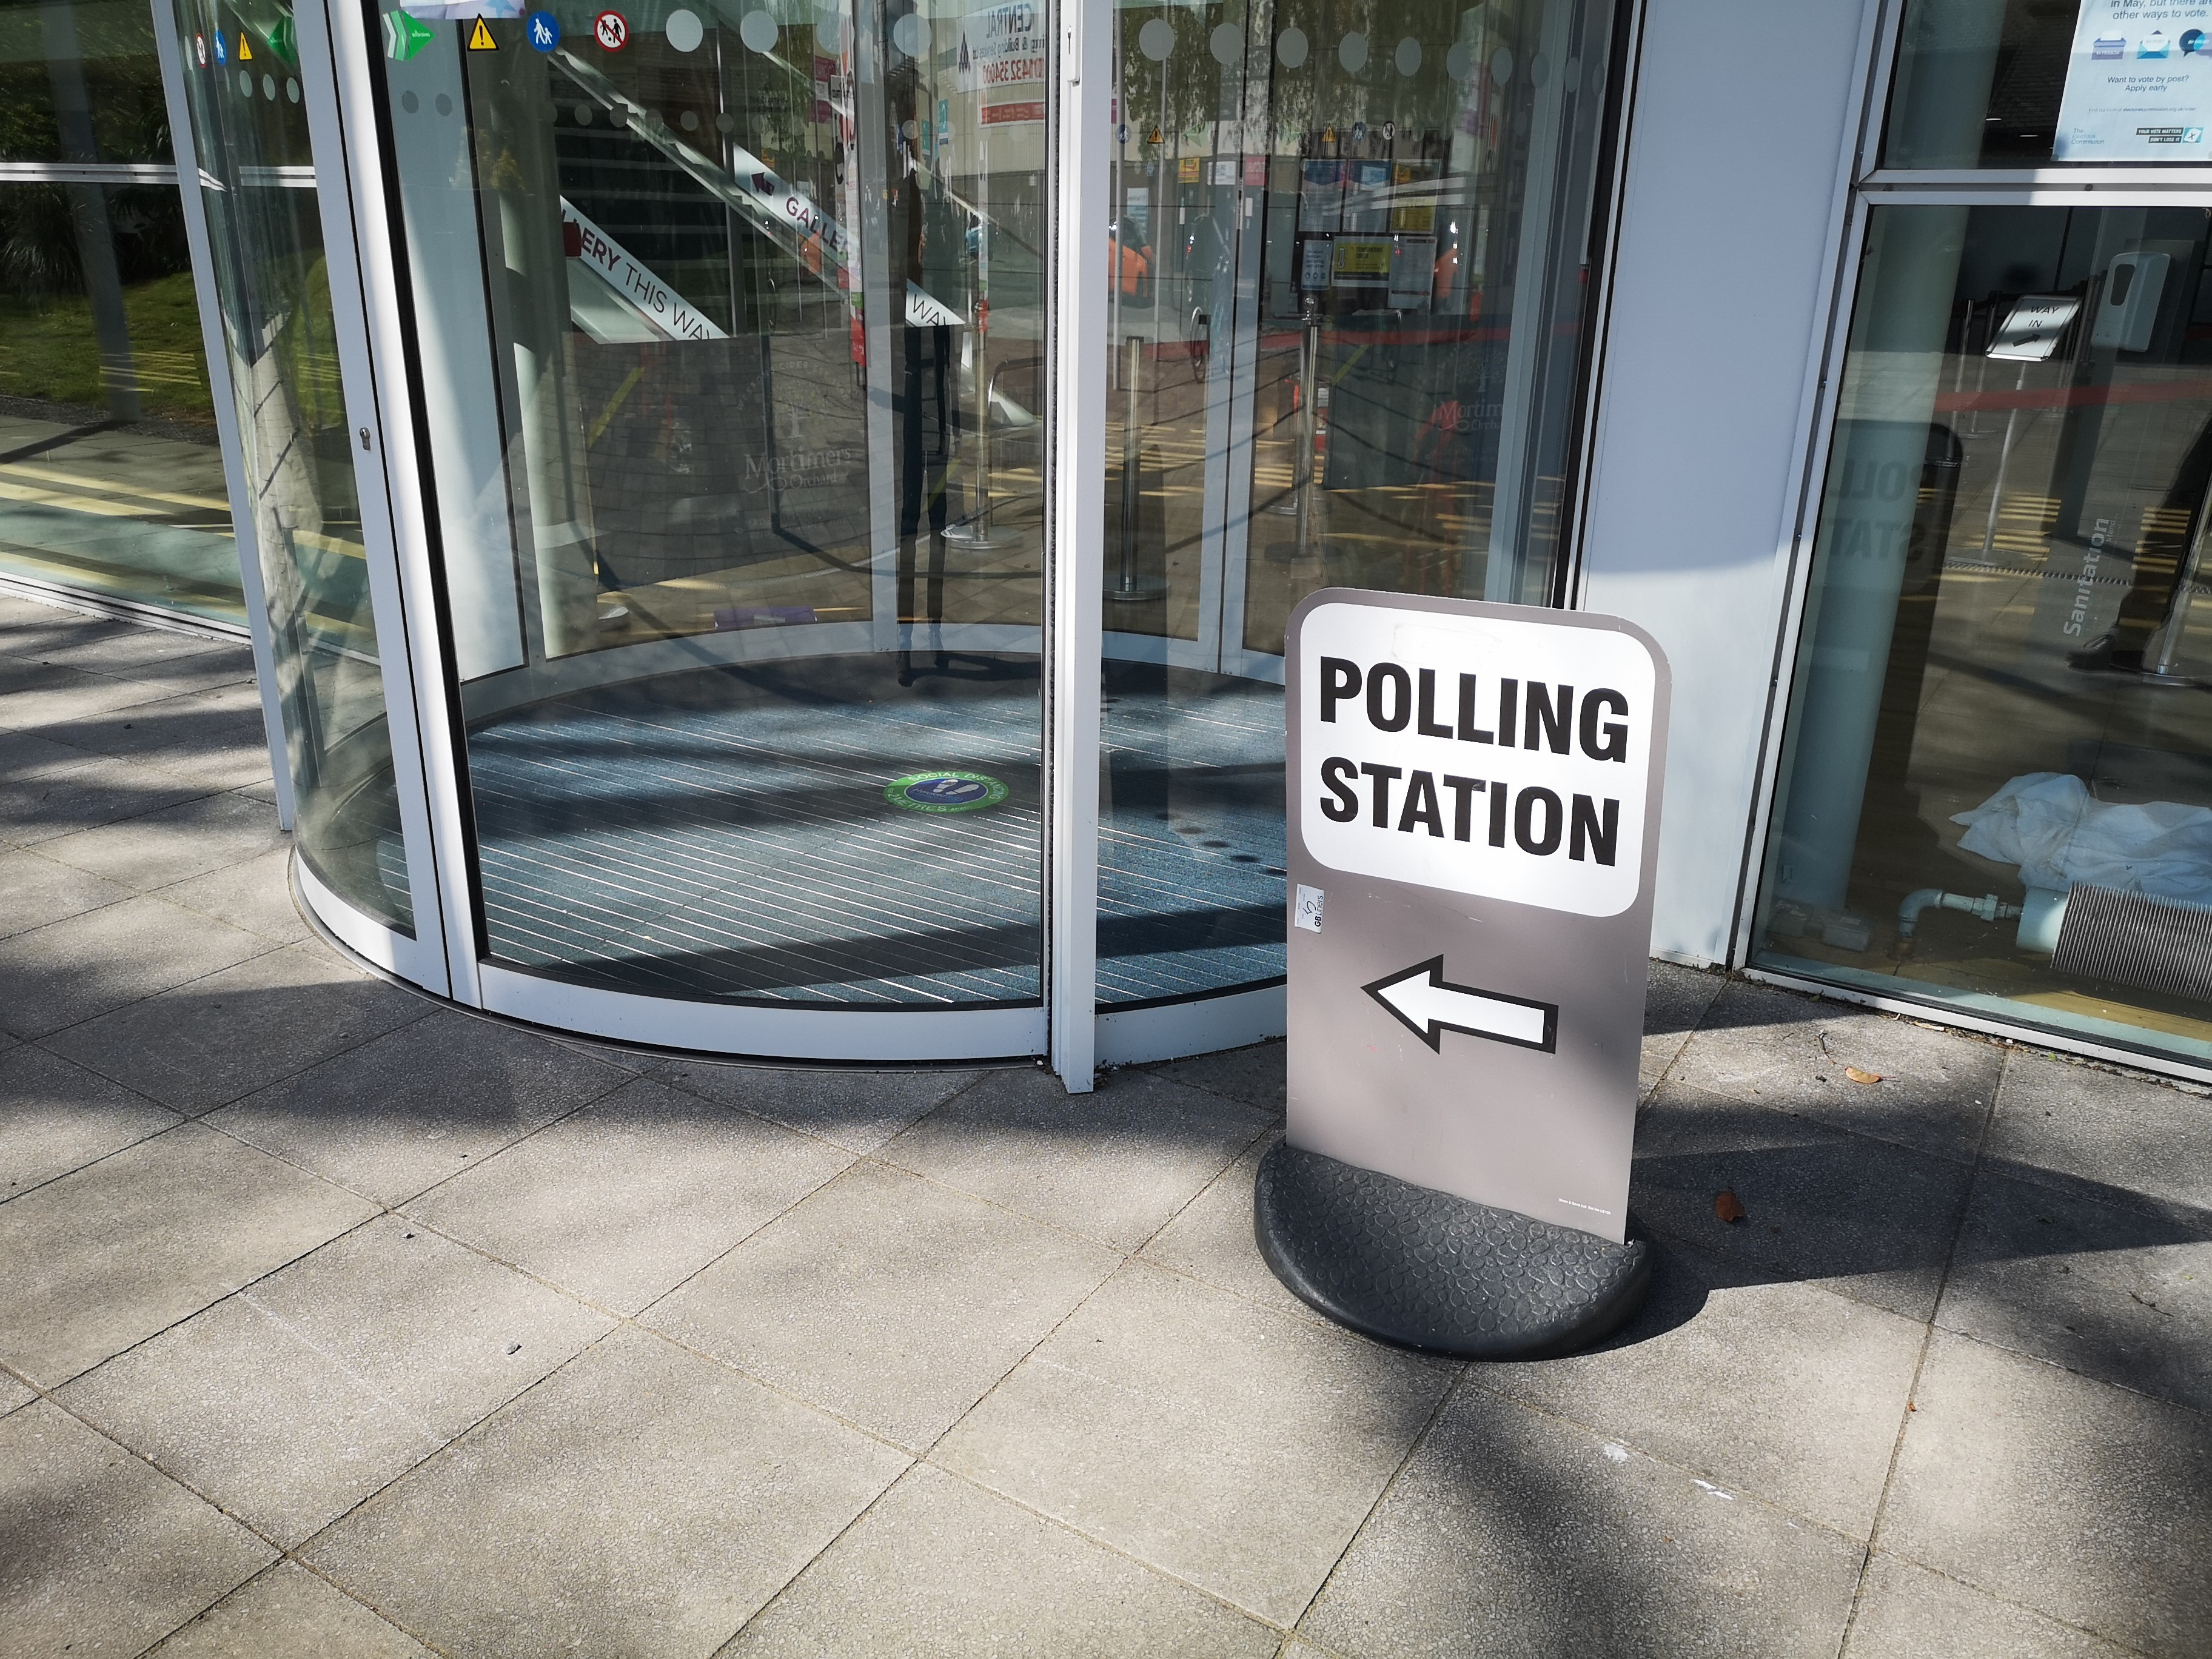 Herefordshire goes to the polls on Thursday